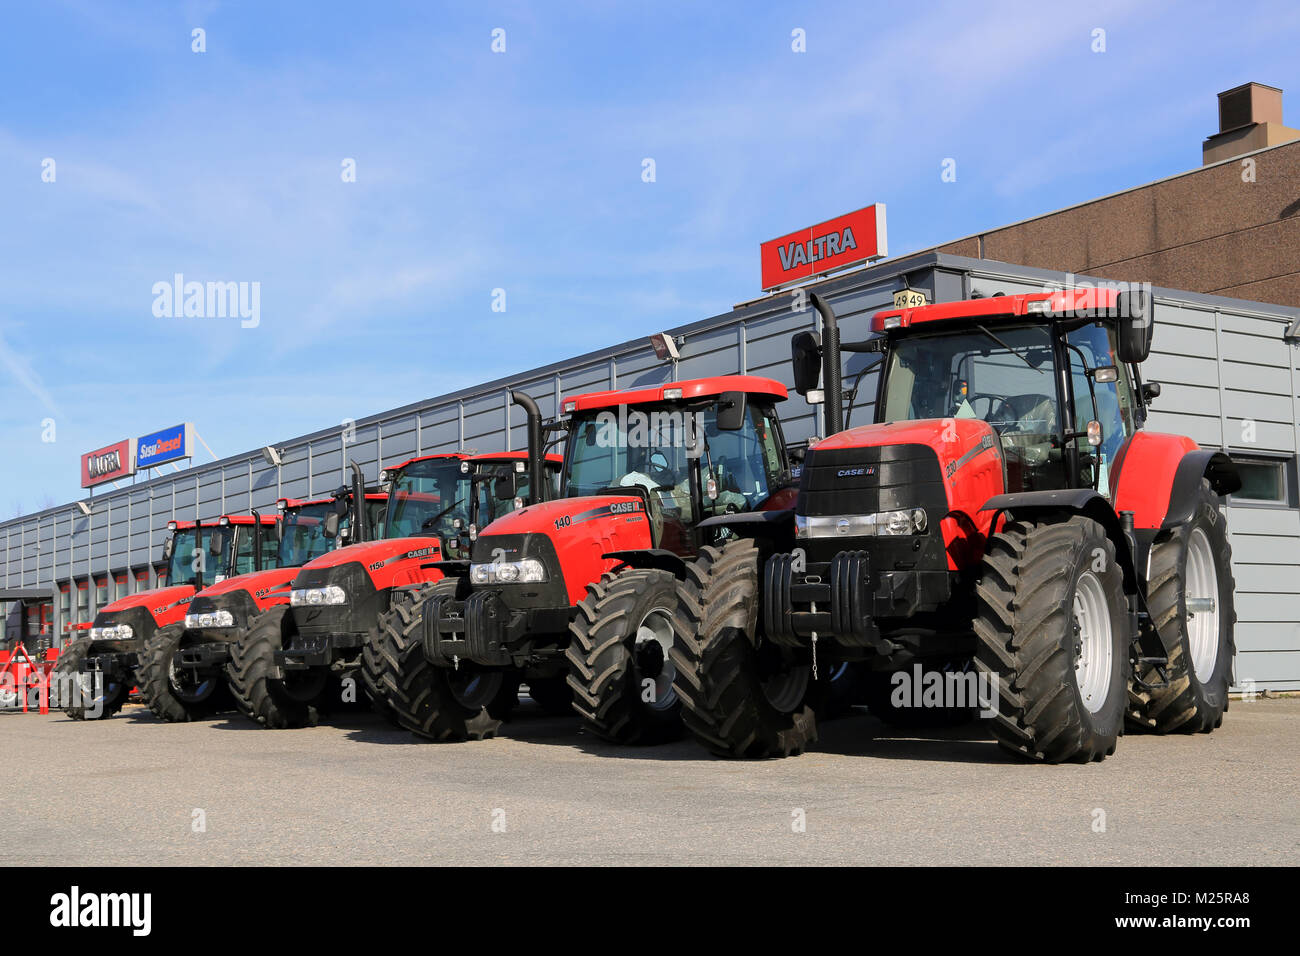 TURKU, FINLAND - APRIL 5, 2014: Five Case IH agricultural tractors displayed in a row. Case IH wins two gold medals at AGROTECH - the 20th Internation Stock Photo